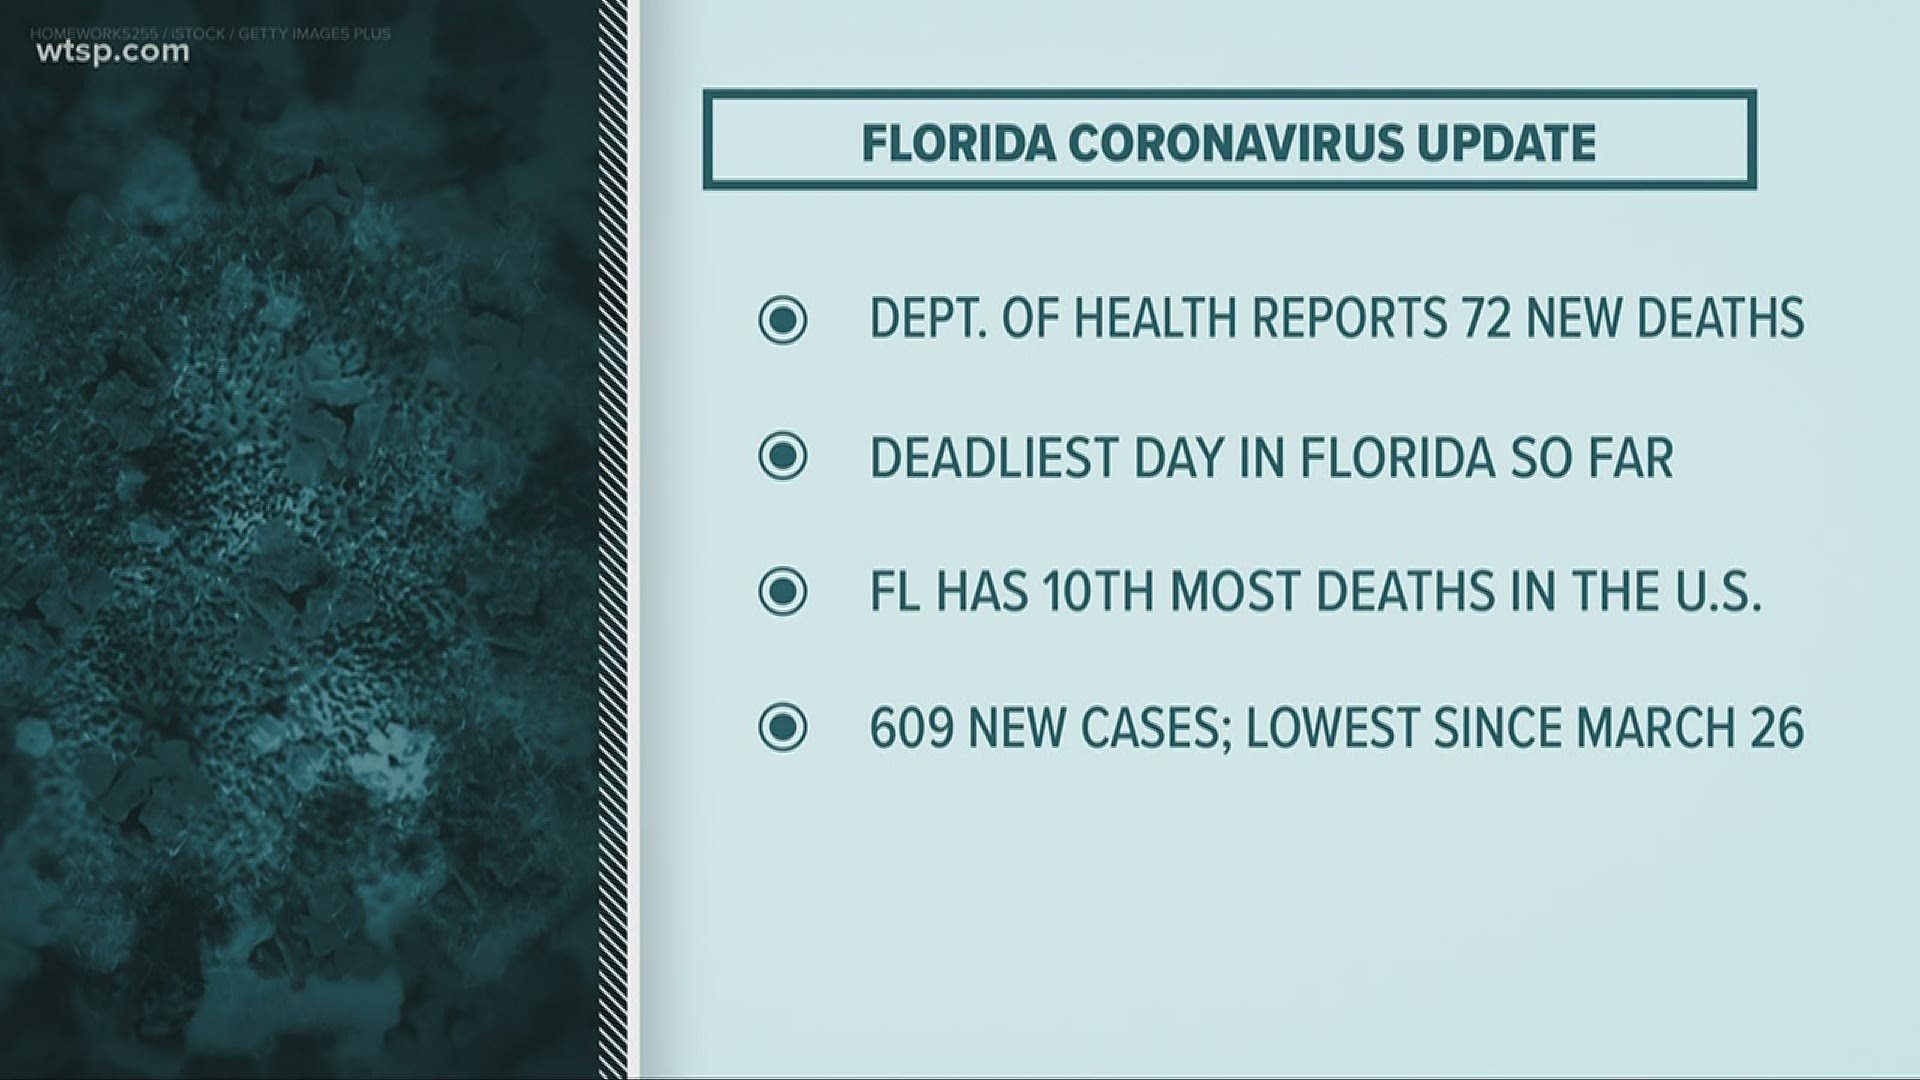 Florida Health reports 571 people have died from COVID-19 coronavirus, an increase of 72 people since Monday evening.